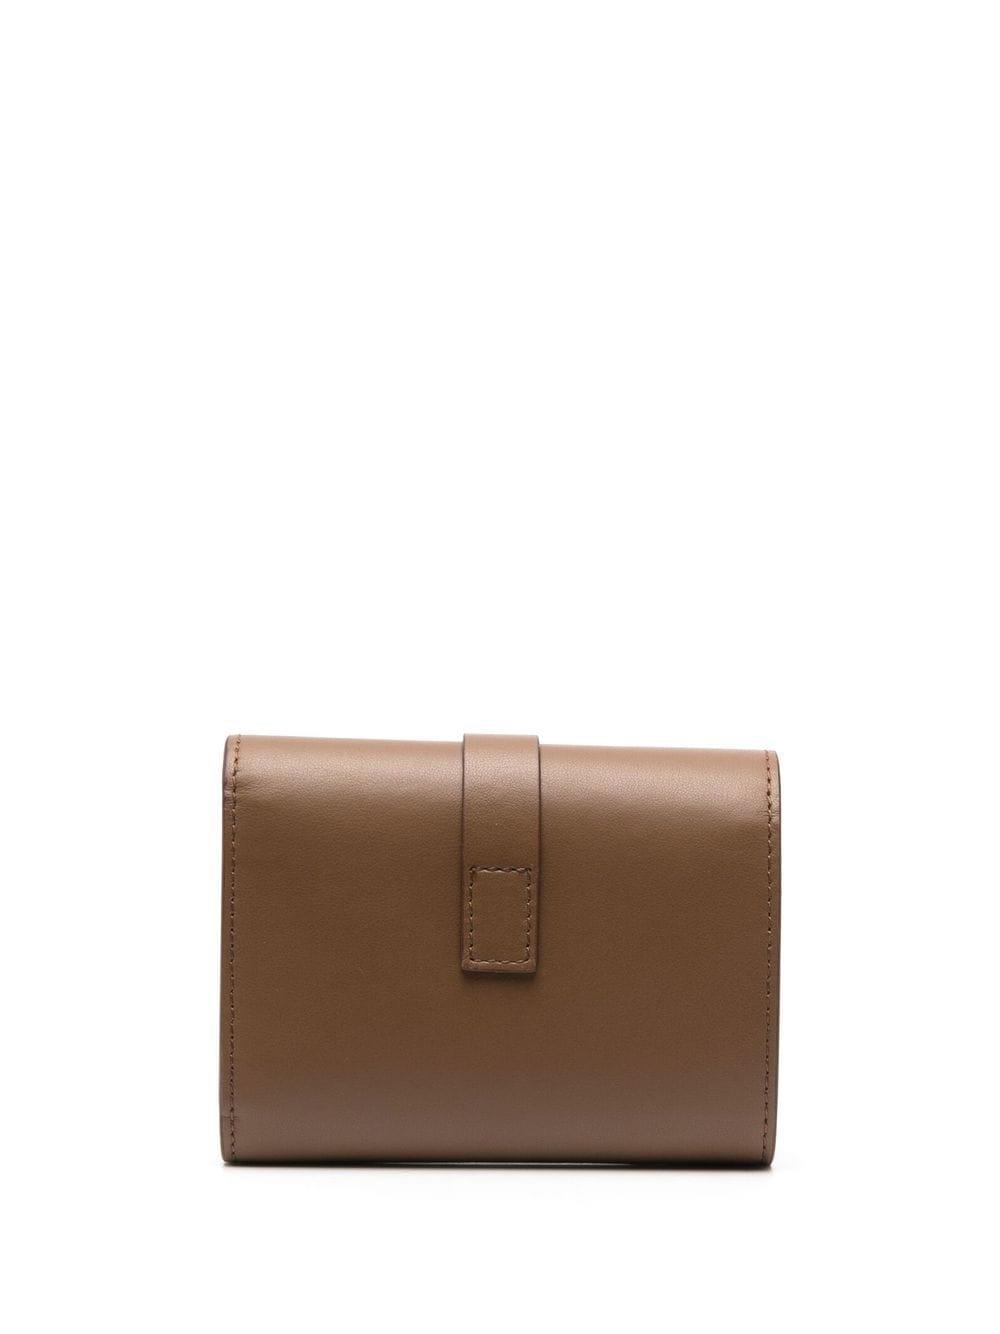 Acne Studios knot-detail leather wallet - Brown